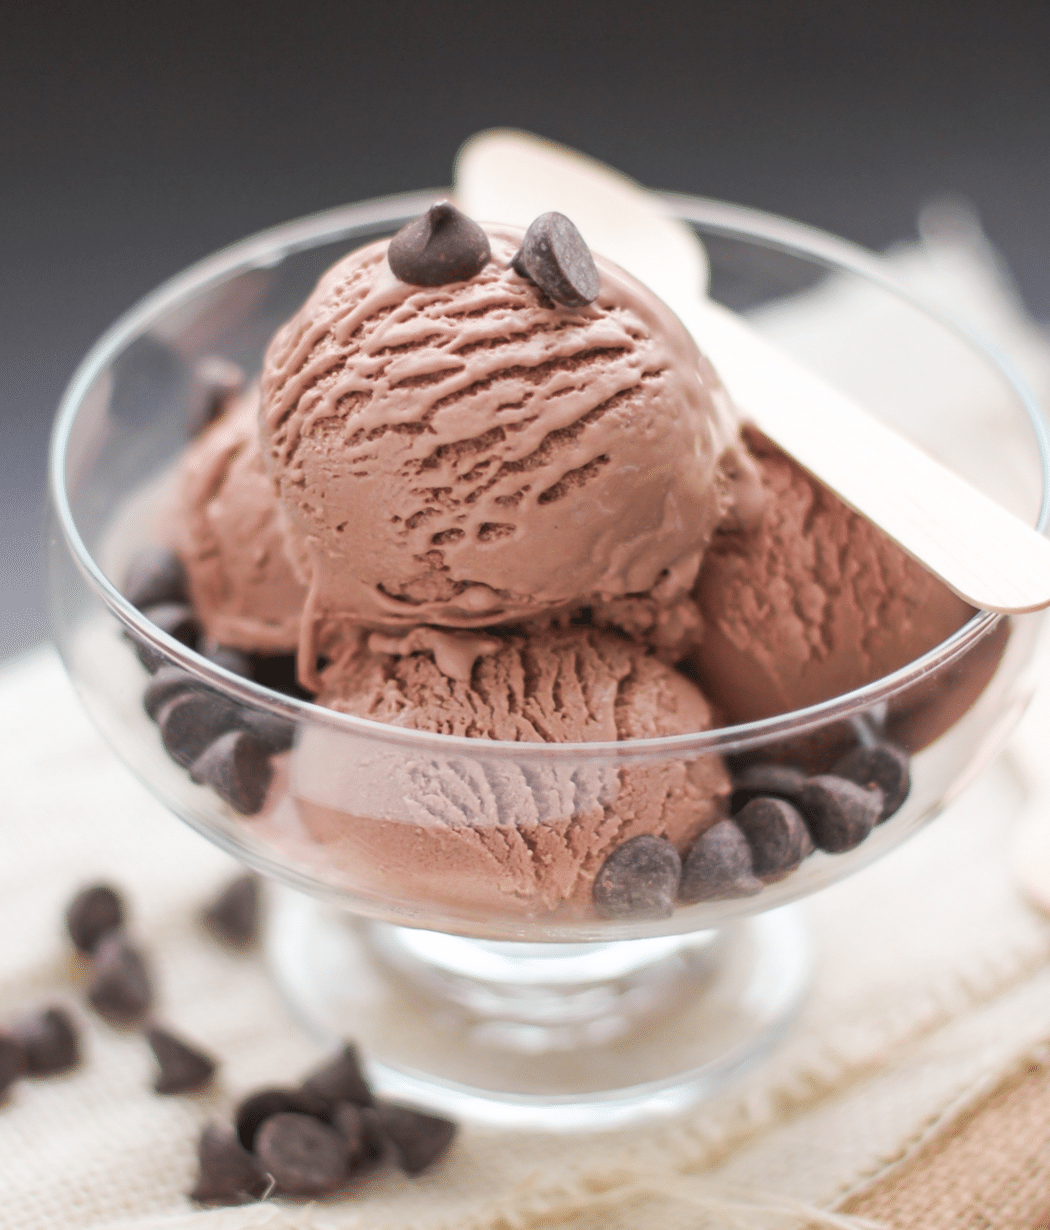 Easy, healthy, homemade Chocolate Frozen Yogurt recipe from the Naughty or Nice Cookbook: The ULTIMATE Healthy Dessert Cookbook – Jessica Stier of Desserts with Benefits